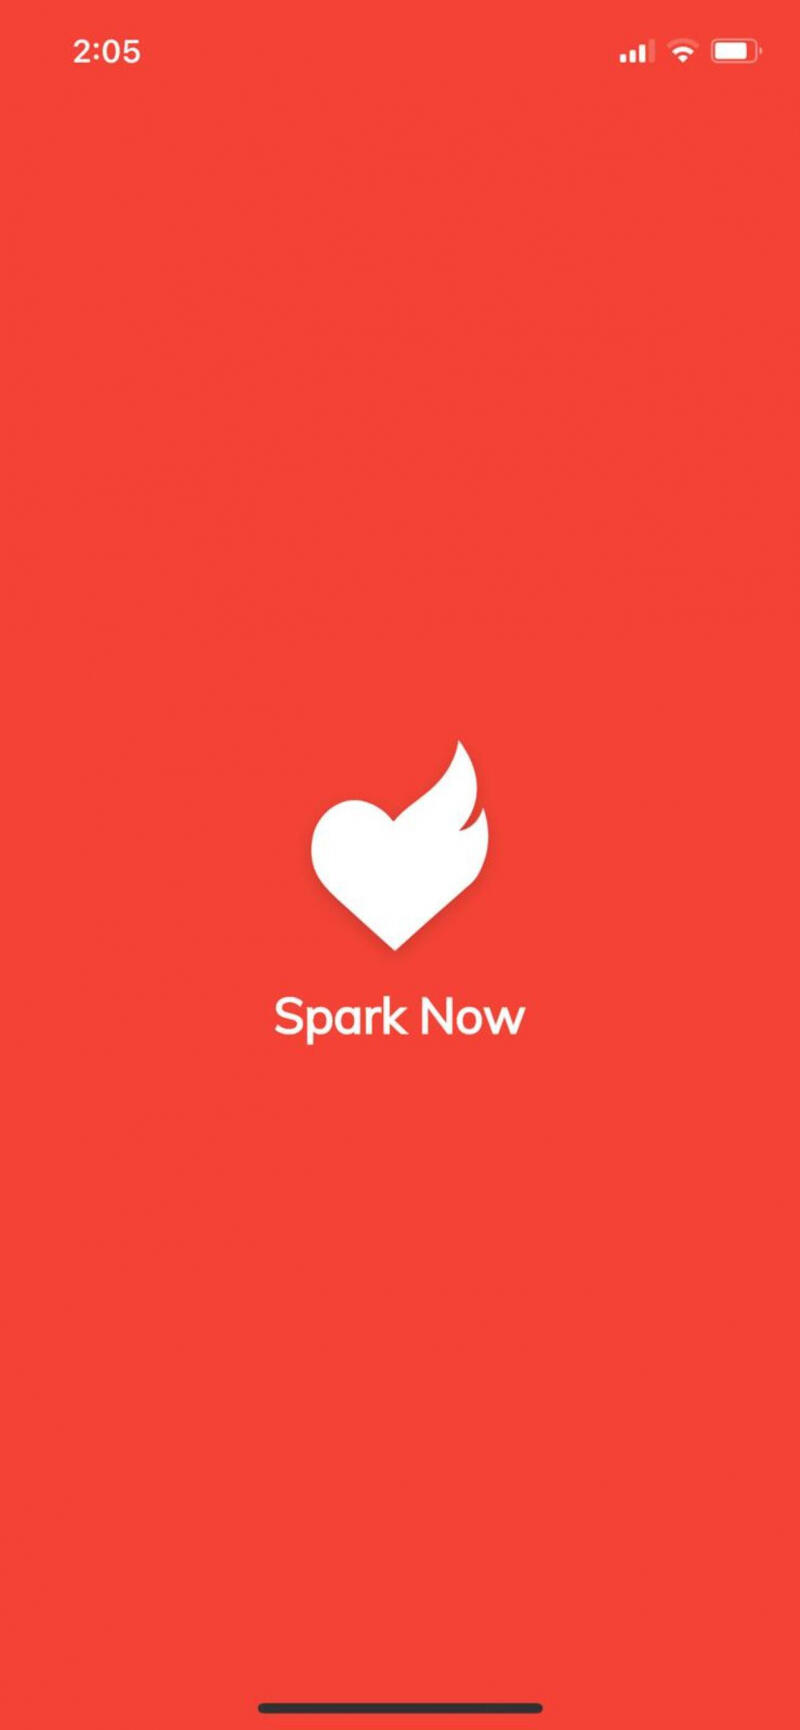 Spark Now Couples Relationship